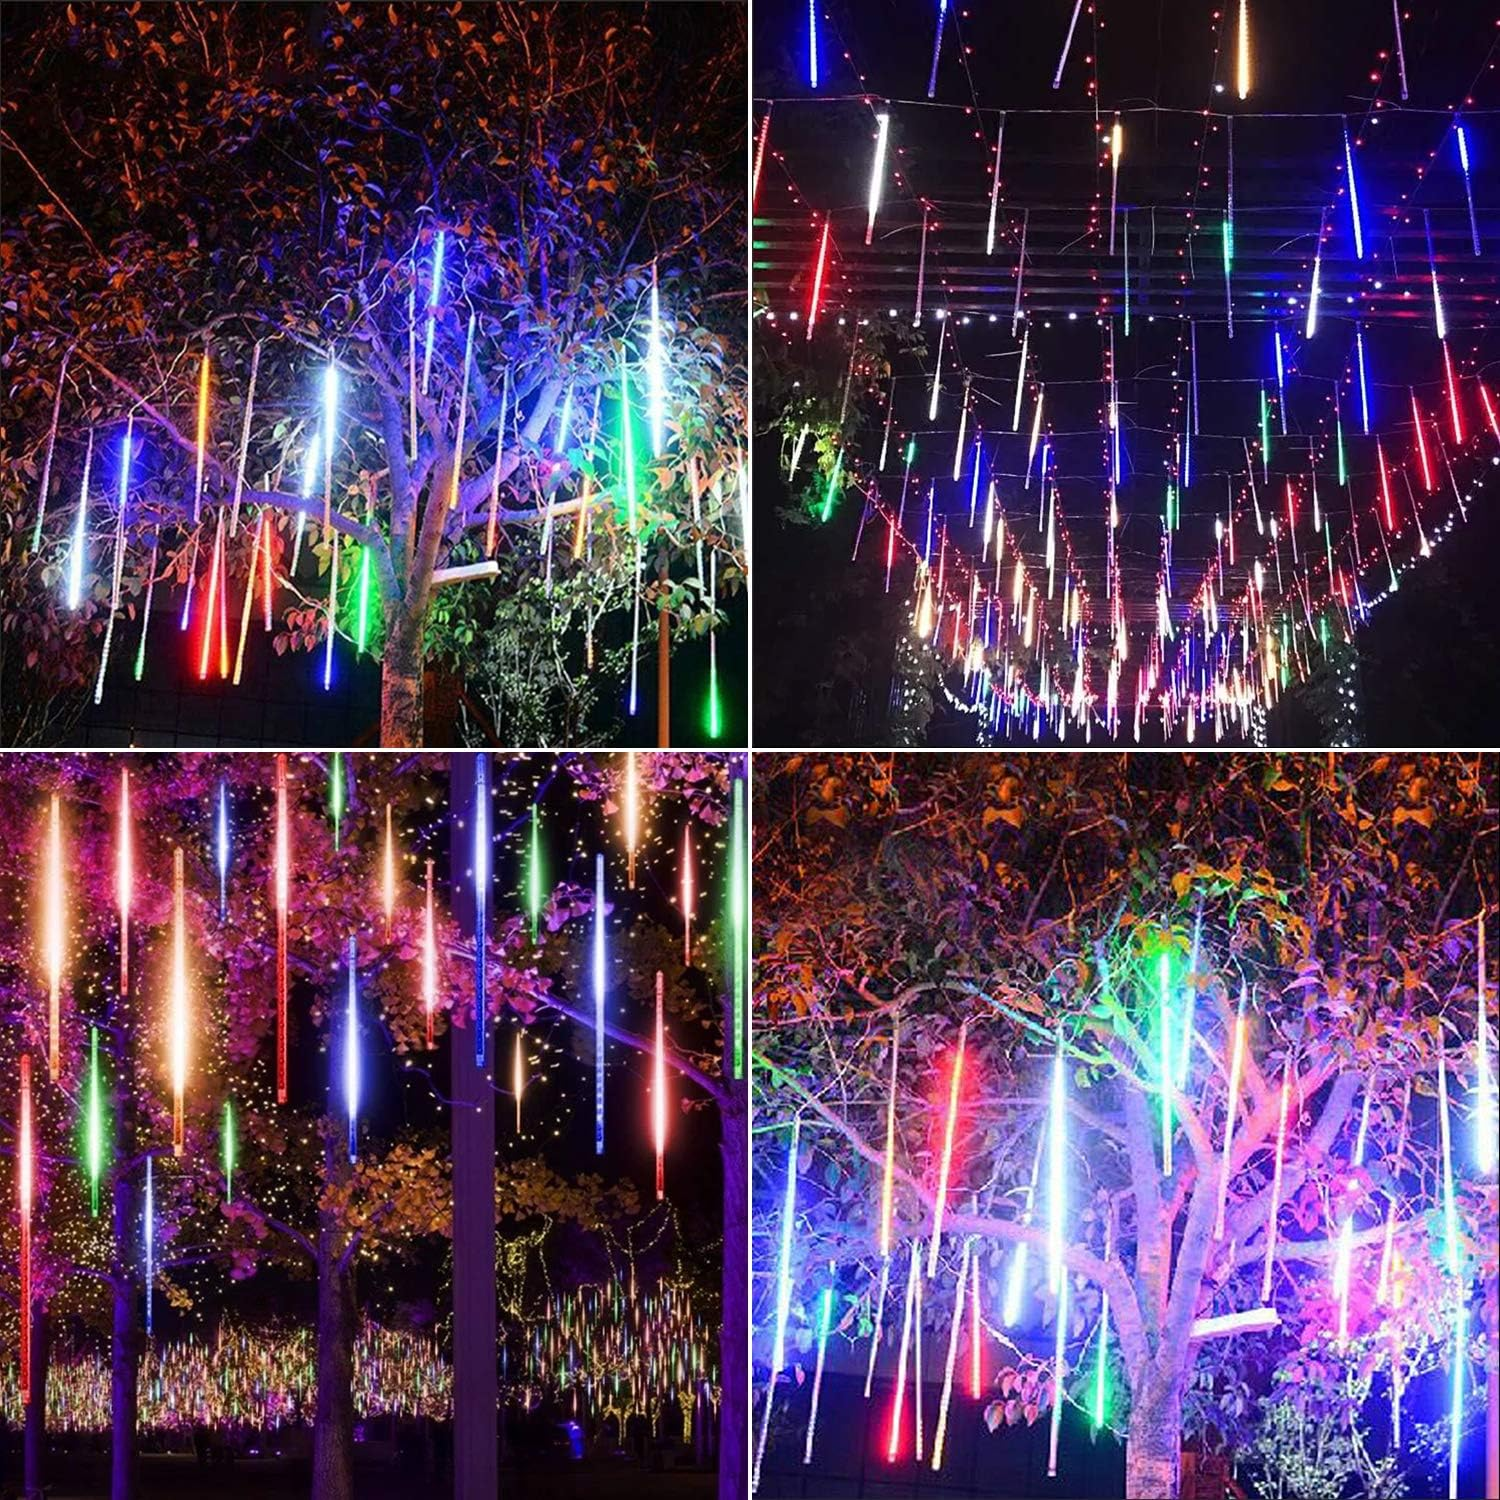 1 x 11.8 Inches / 8 Tubes / 192 LED / Multicolor